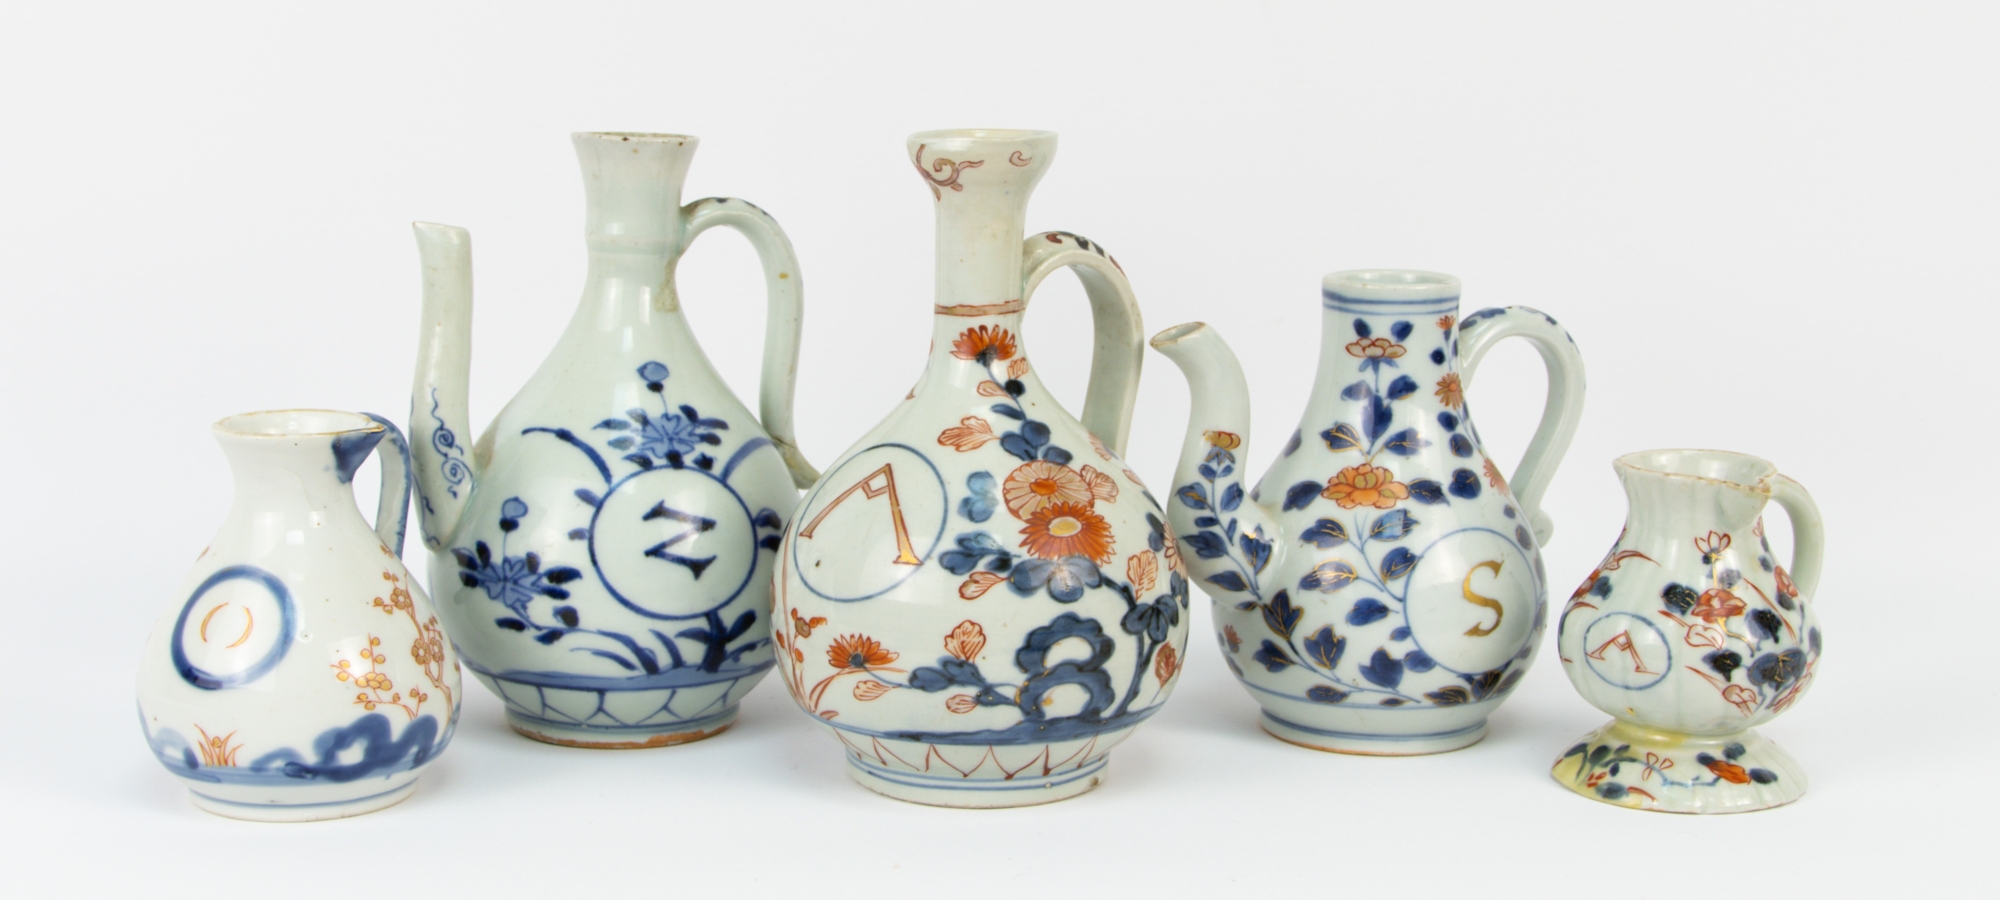 Japanese Art and Antiques Auction